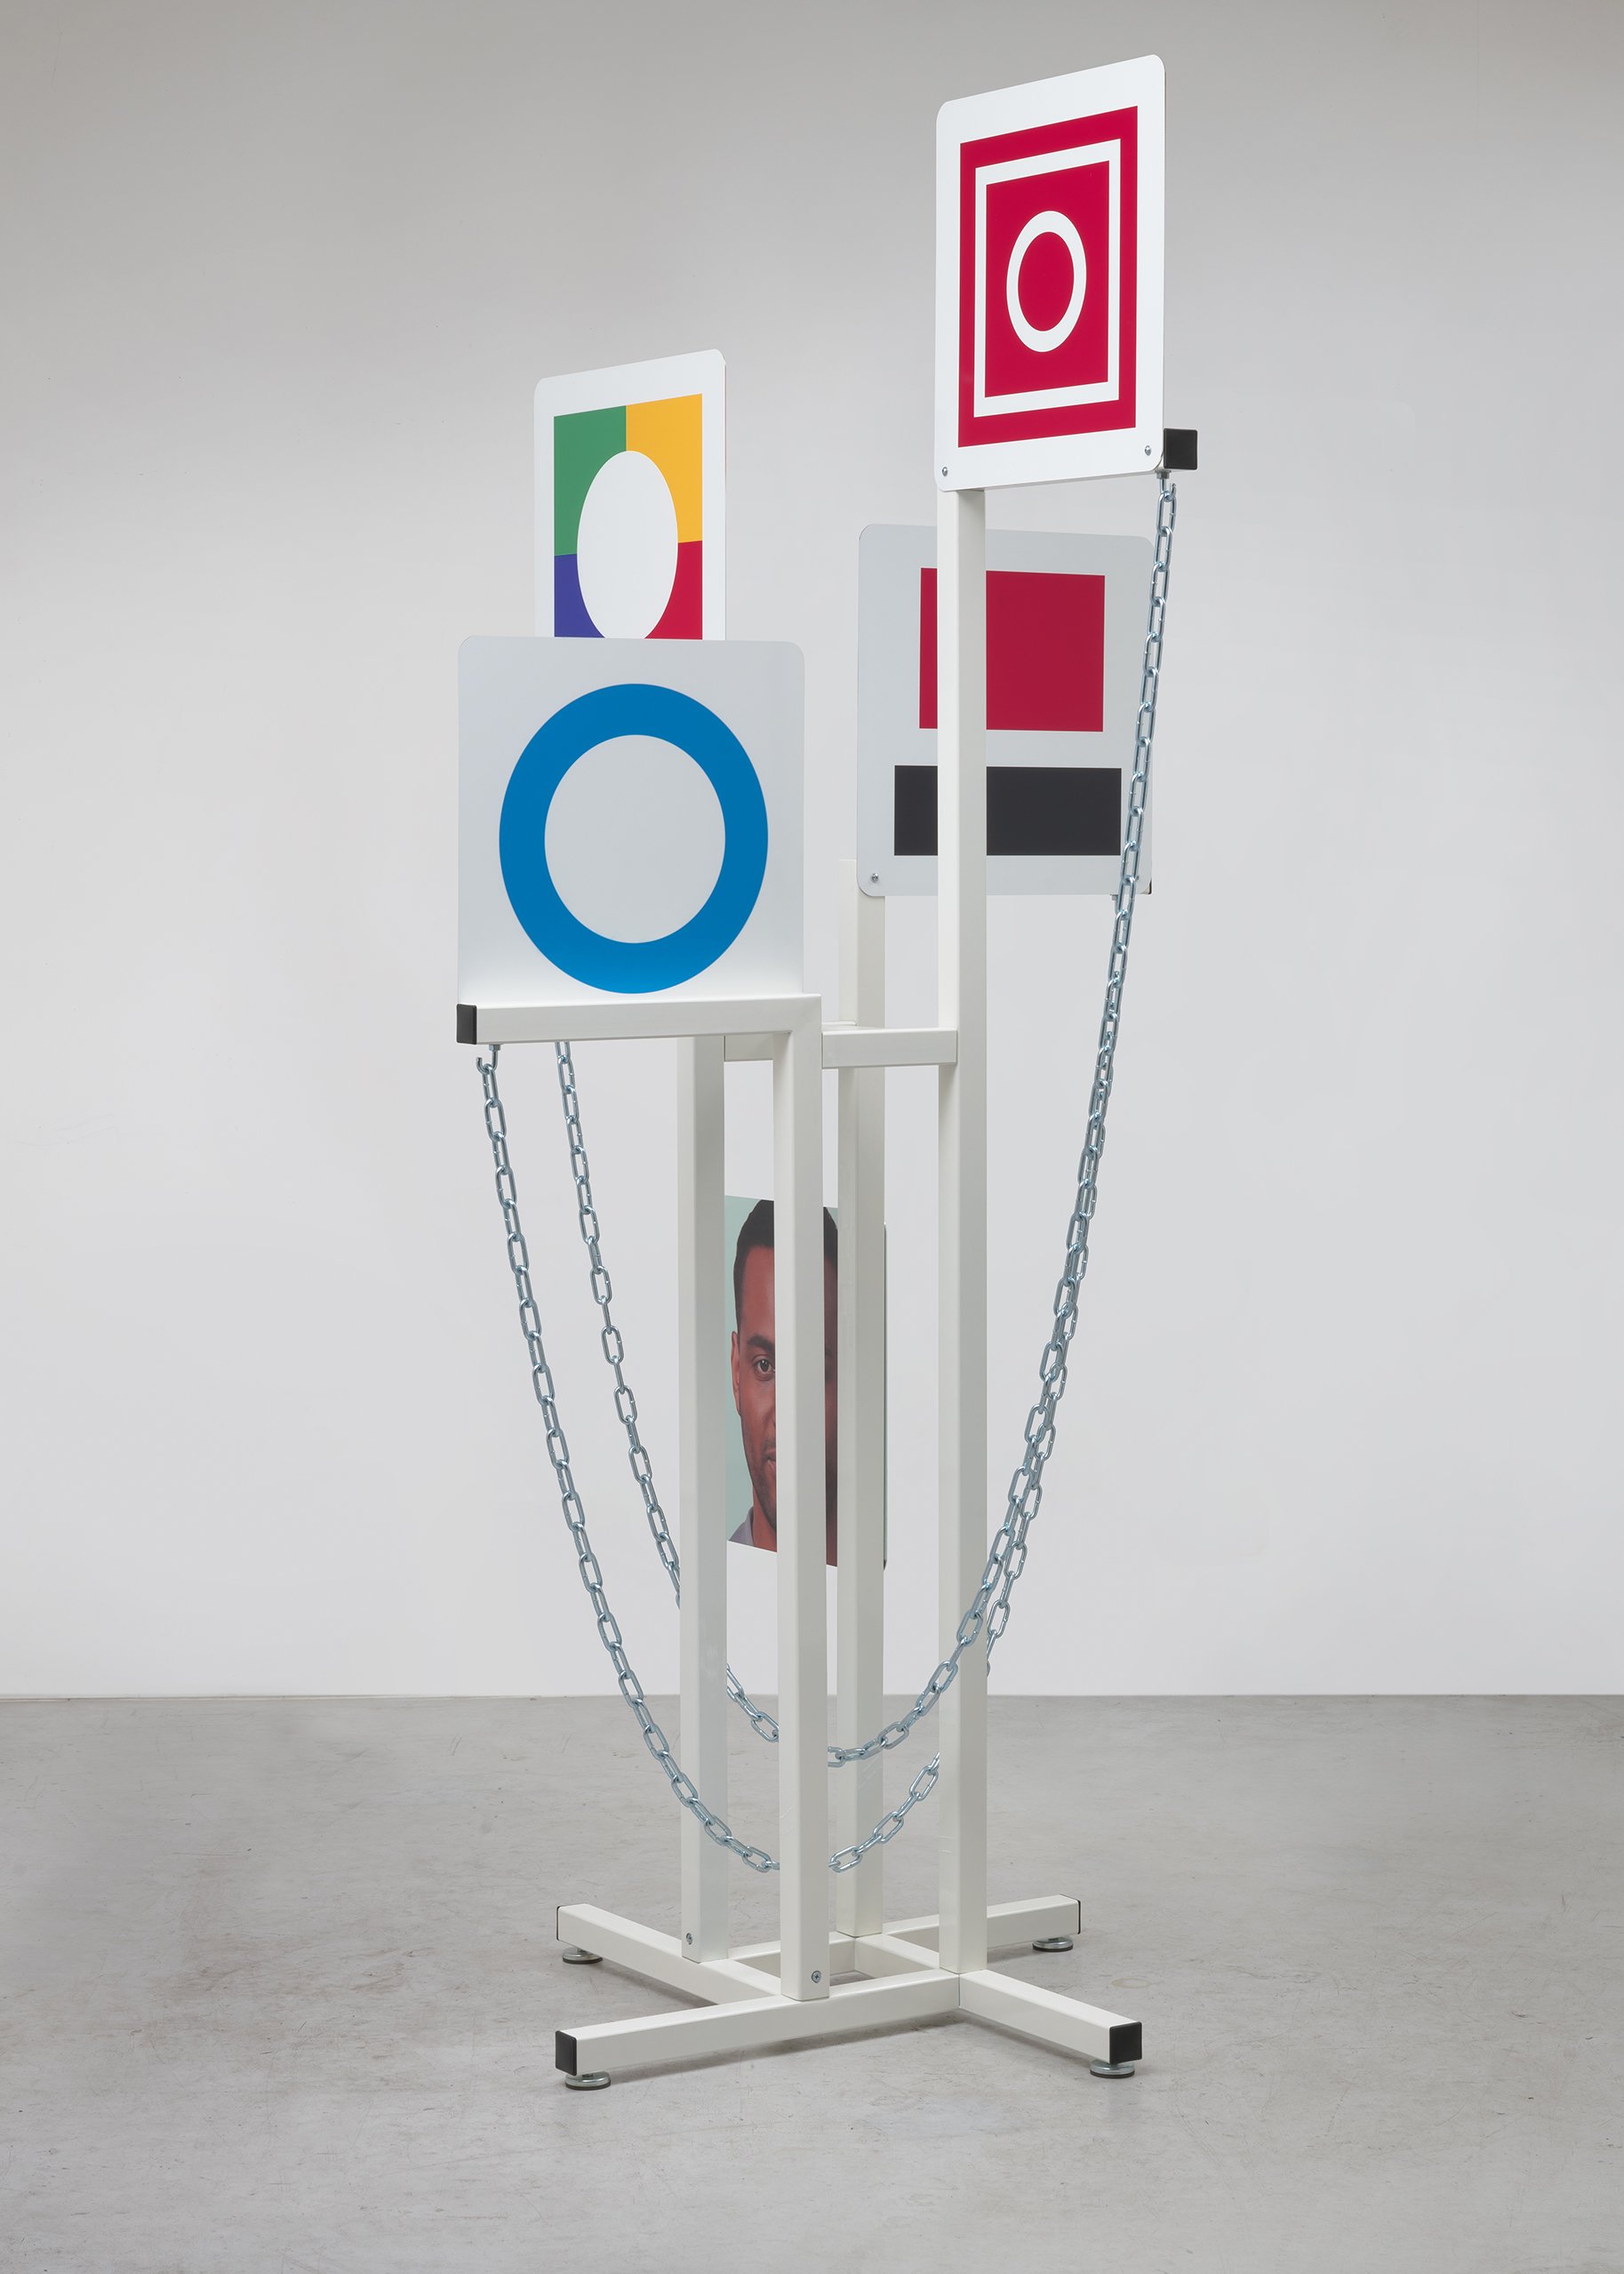  David Schafer  Displayer , 2021 fabricated and powder steel, chain, printed aluminum signs, hardware, AI generated face 91 x 44 x 44 in (231.1 x 111.8 x 111.8 cm) 